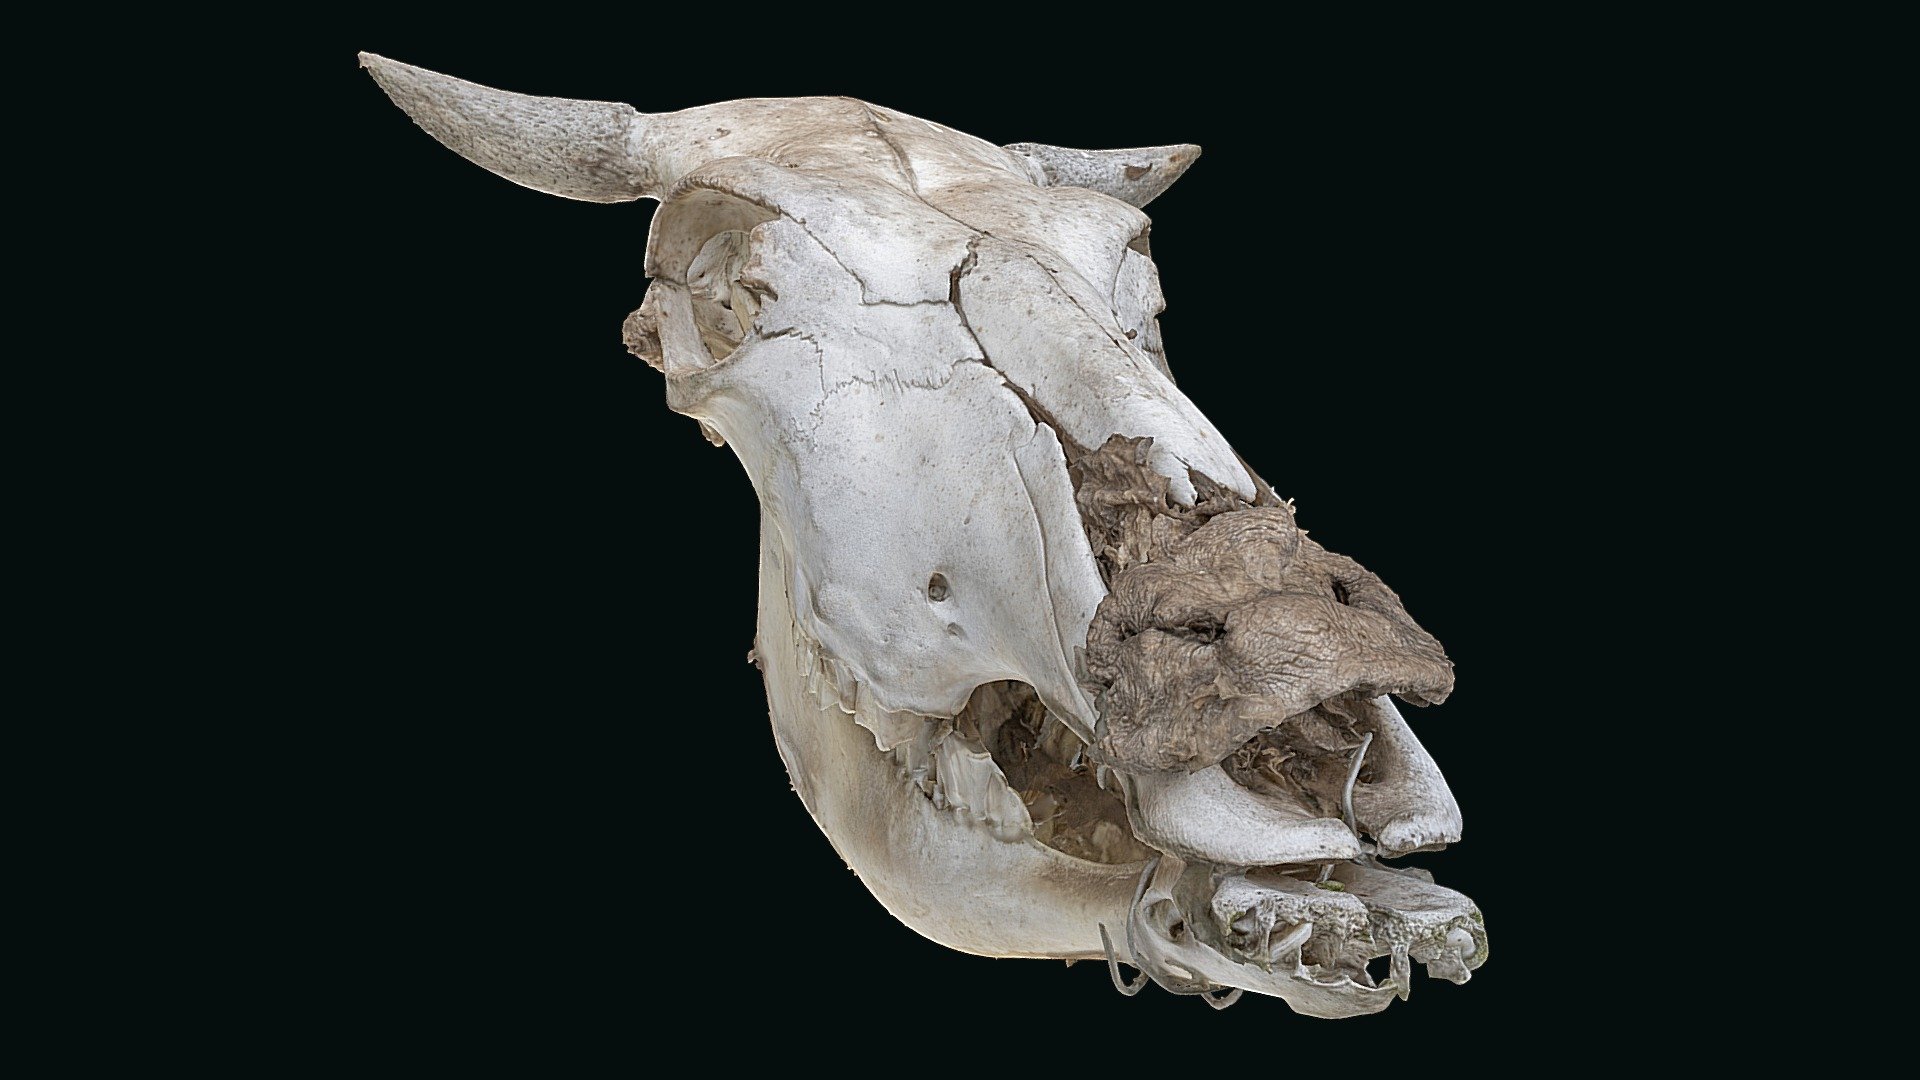 cow skull side view